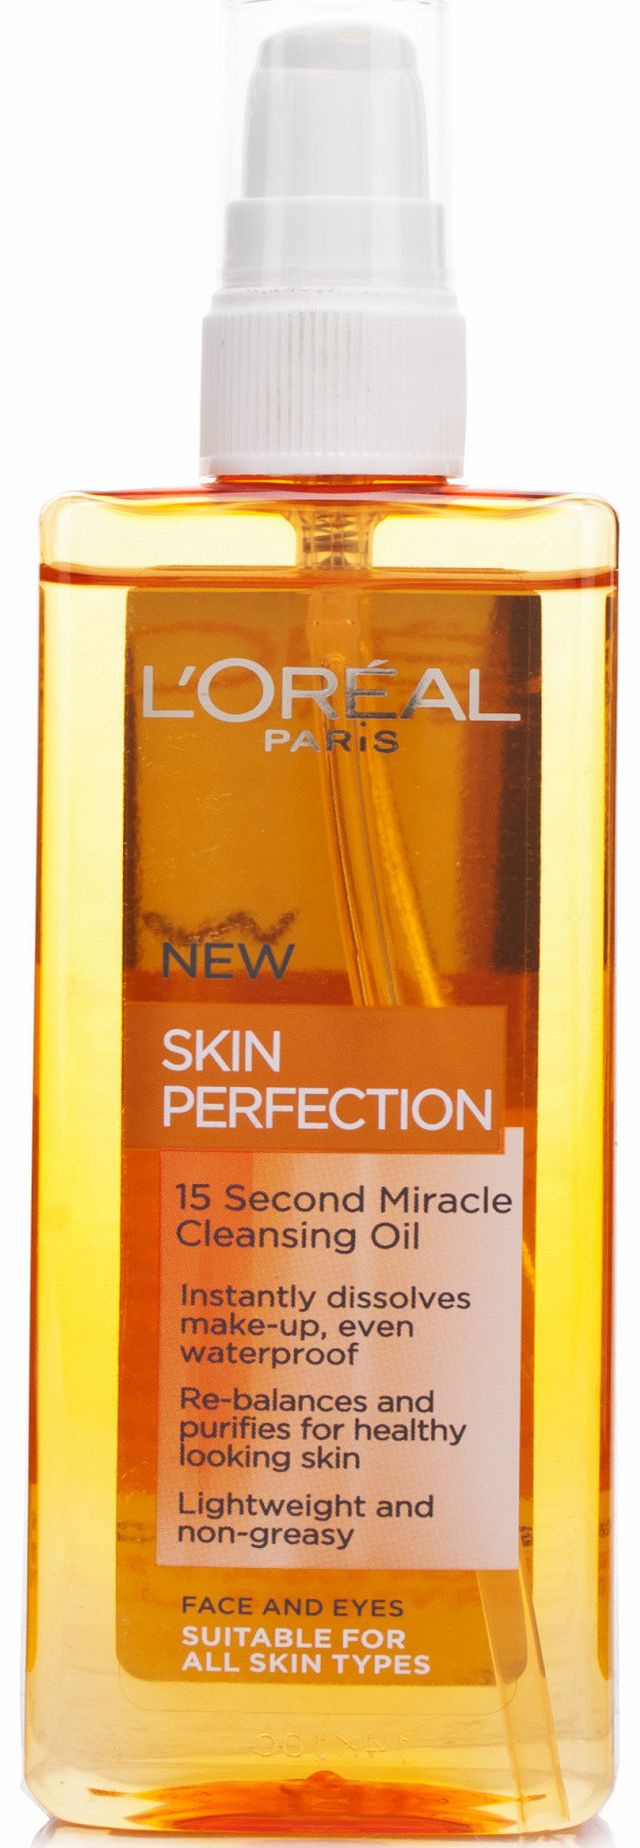 L'Oreal Skin Perfection Cleansing Oil